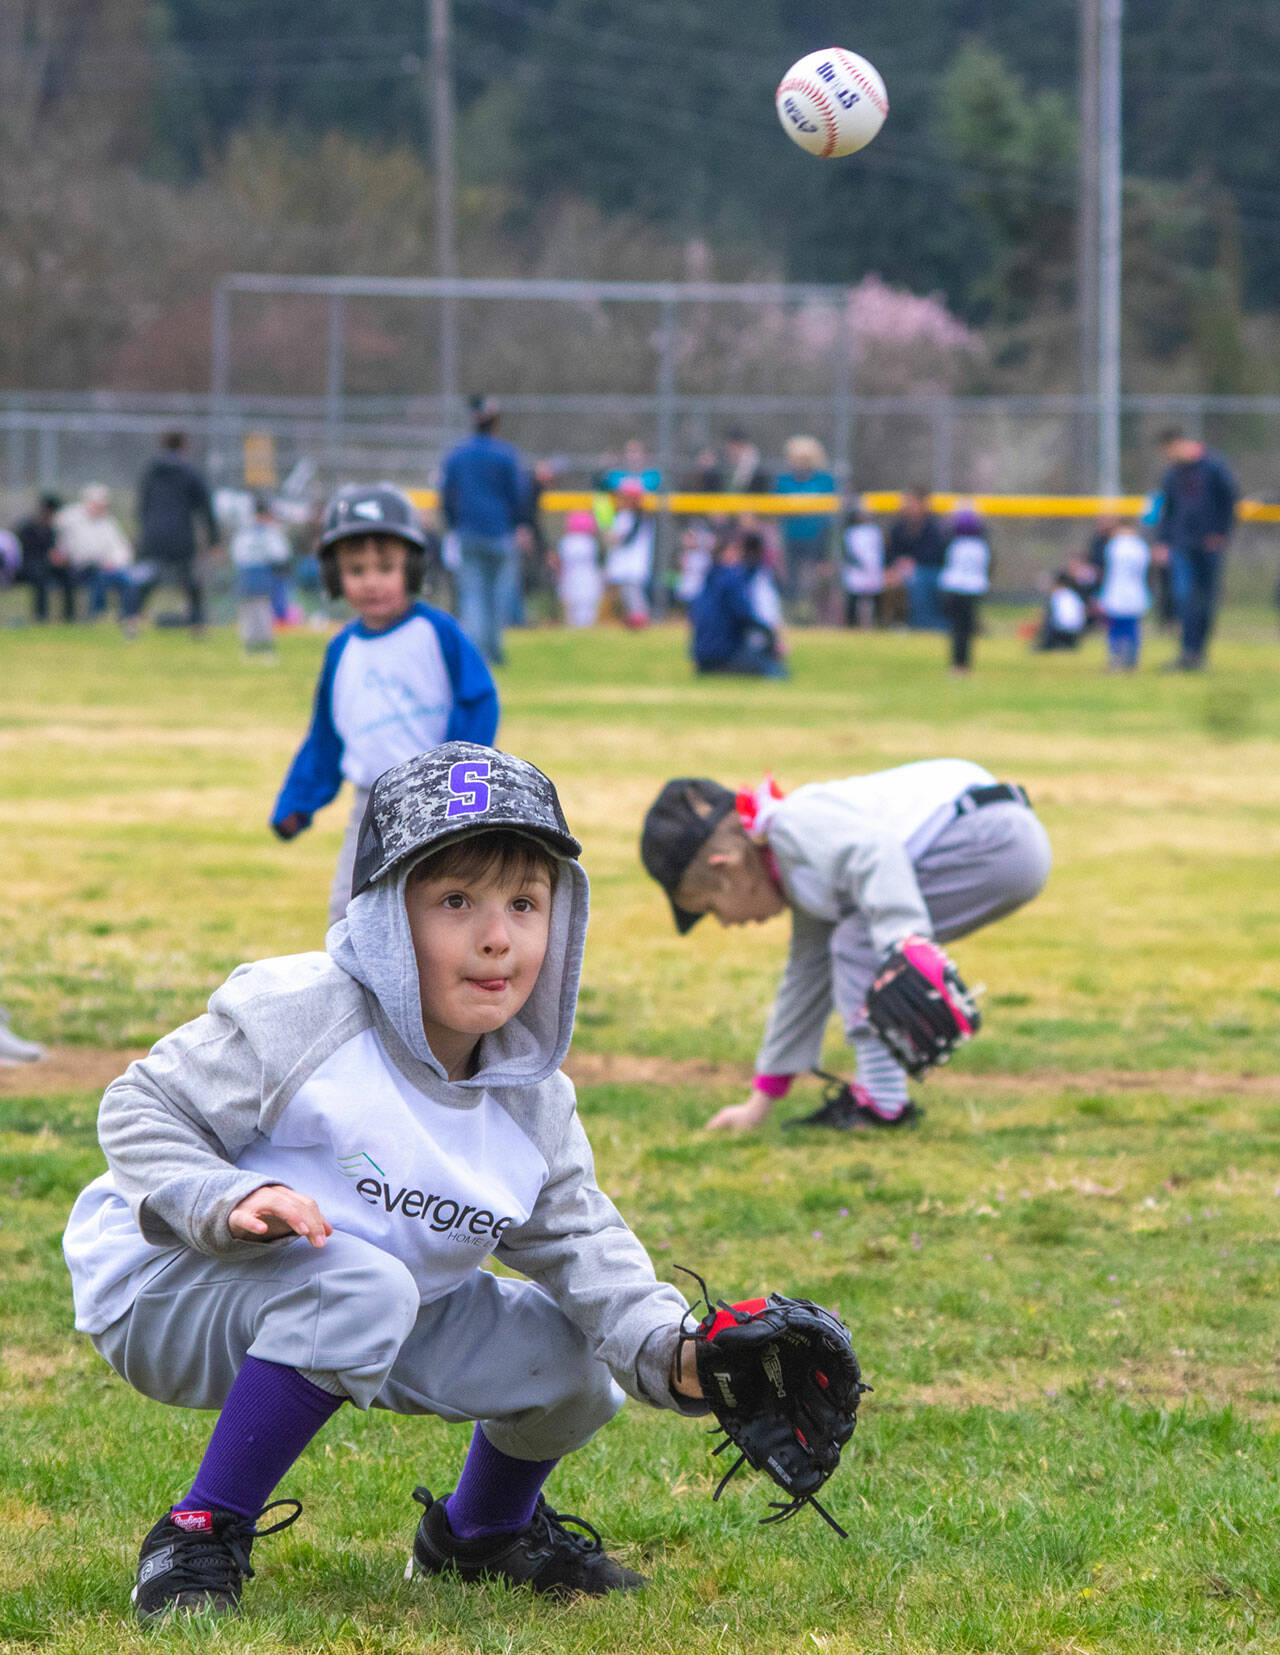 Play ball! Little League celebrates Opening Day